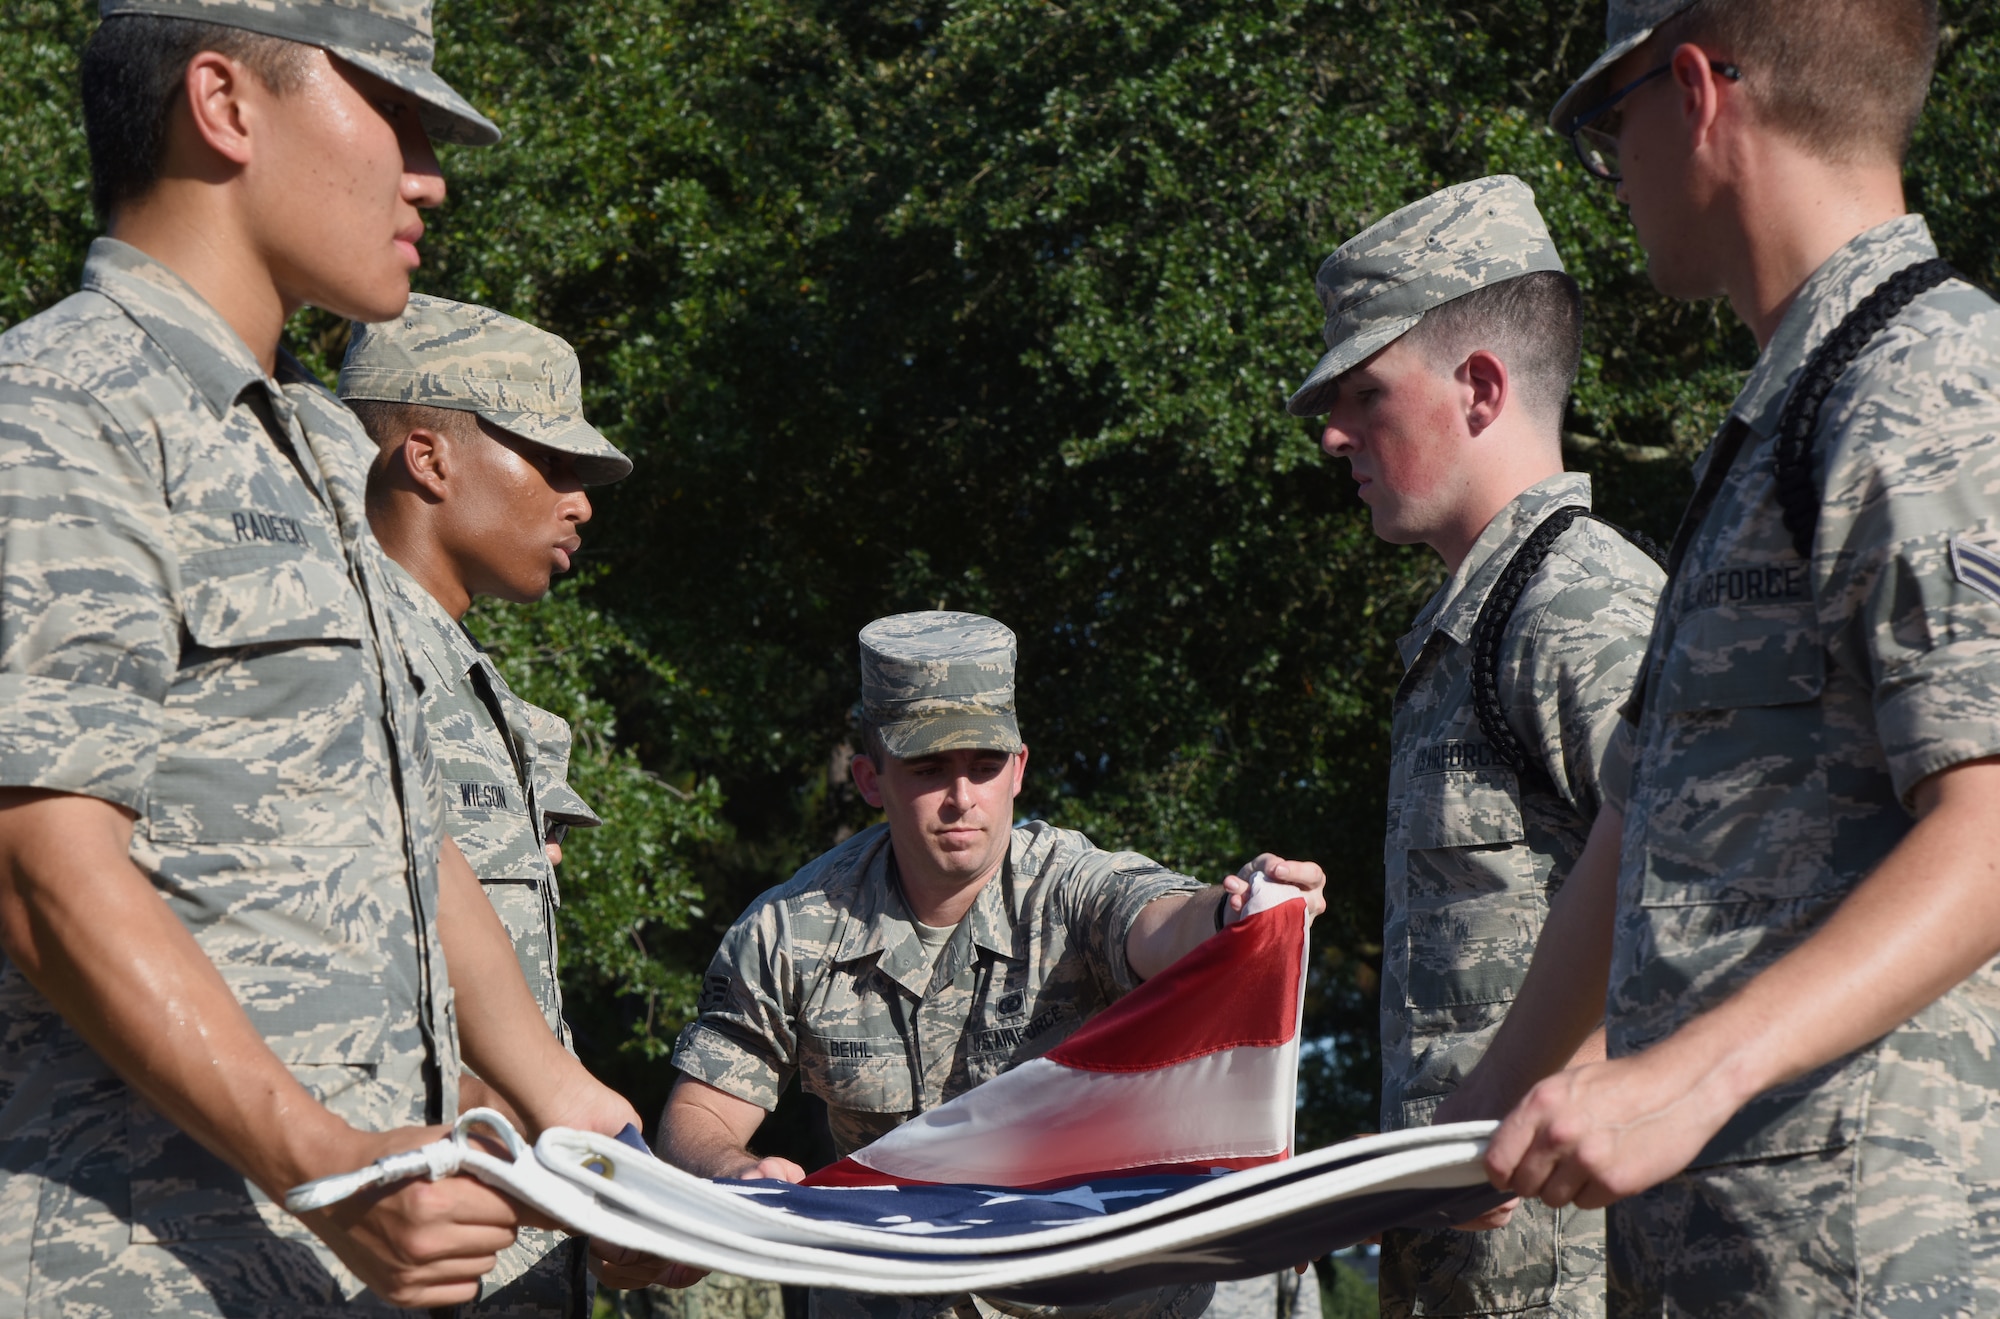 Keesler Airmen participate in folding the U.S. Flag during the POW/MIA Retreat Ceremony at Keesler Air Force Base, Mississippi, Sept. 20, 2018. The event was held to raise awareness and to pay tribute to all prisoners of war and those military members still missing in action. (U.S. Air Force photo by Kemberly Groue)